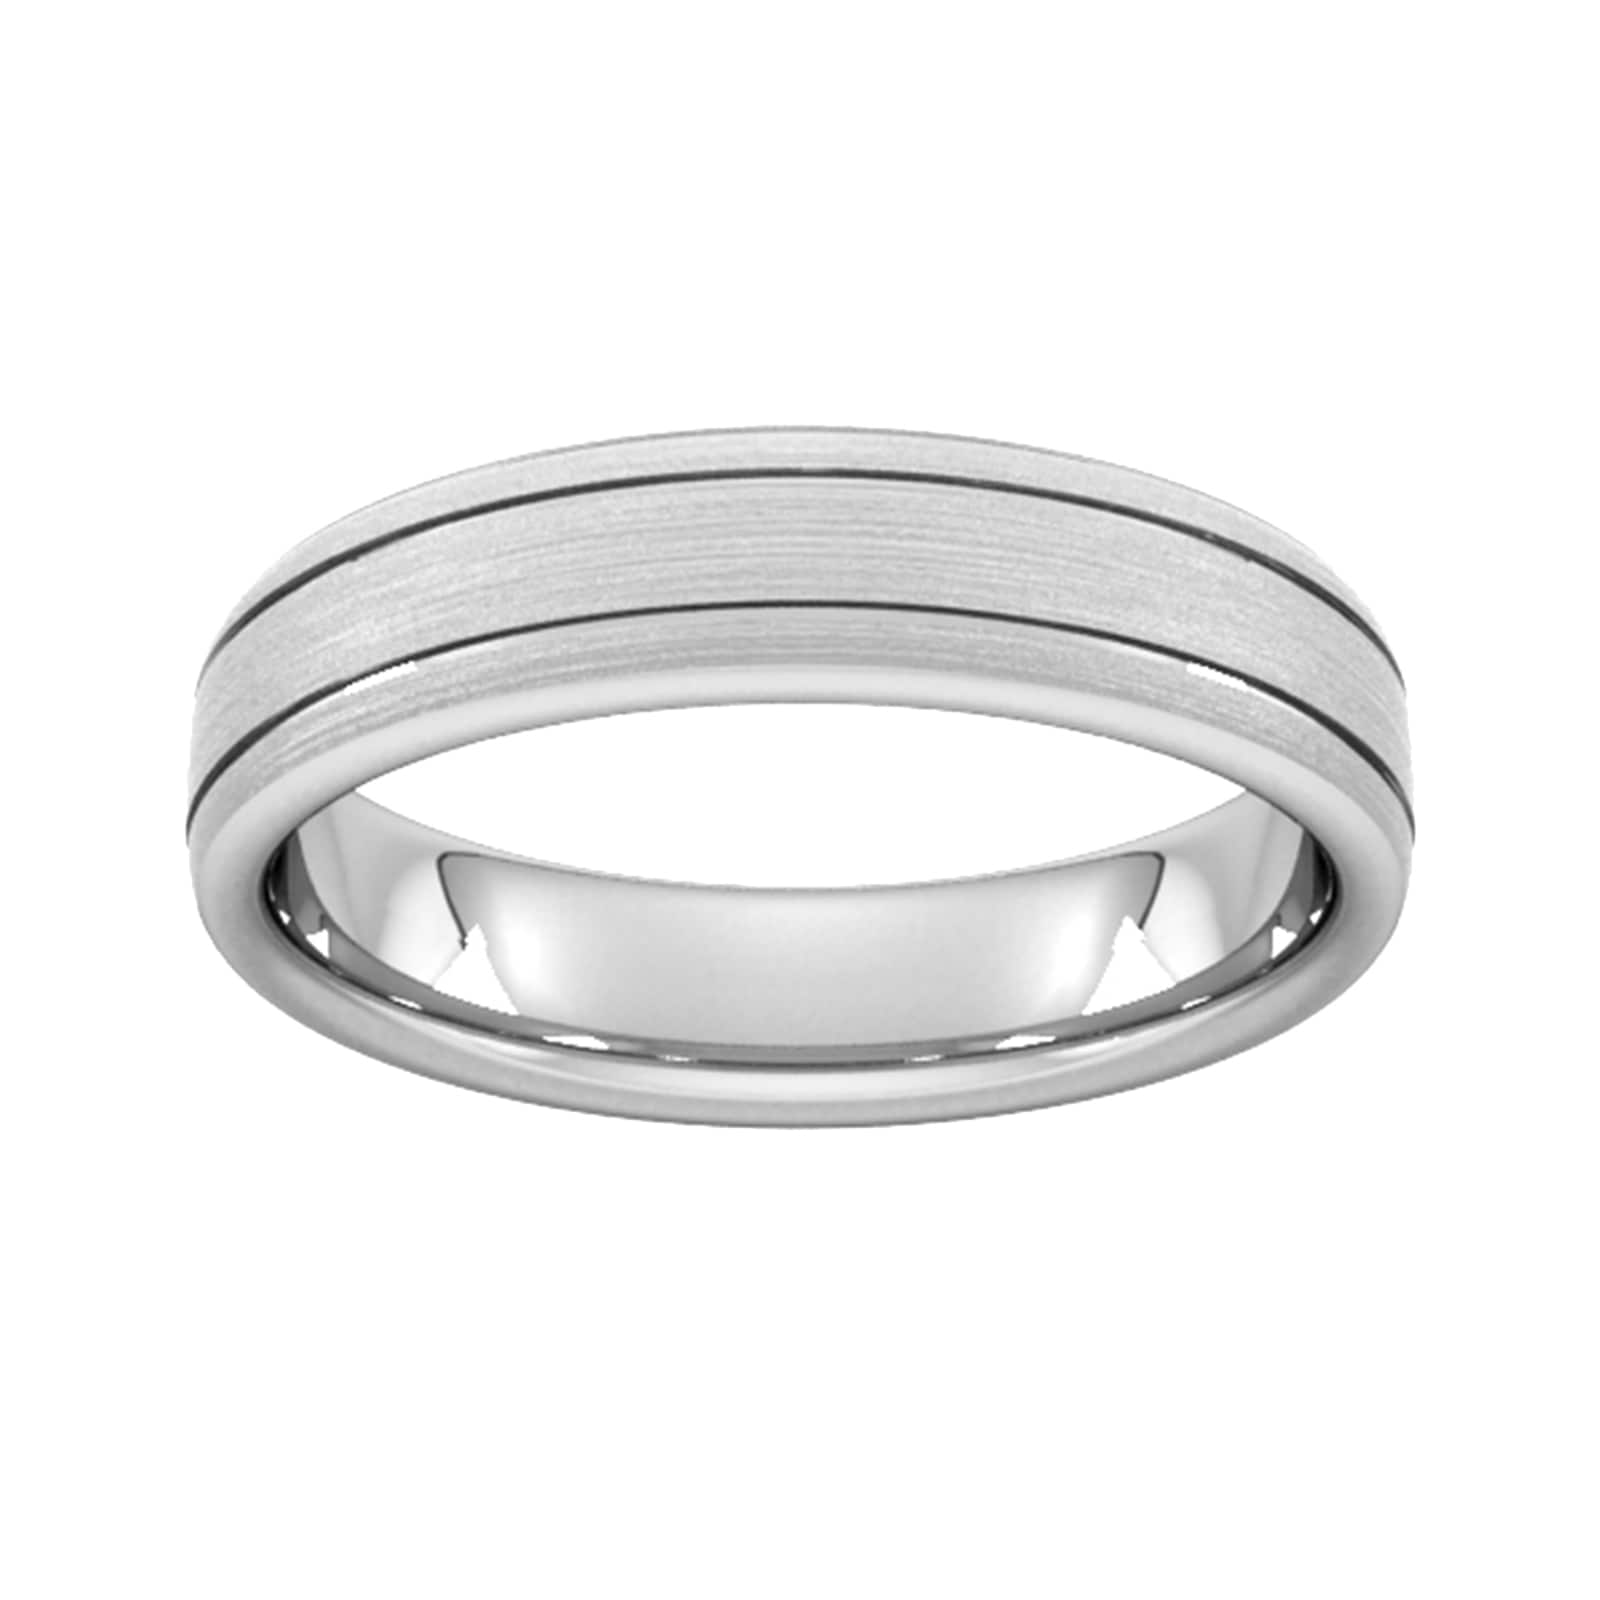 5mm Slight Court Standard Matt Finish With Double Grooves Wedding Ring In 9 Carat White Gold - Ring Size G